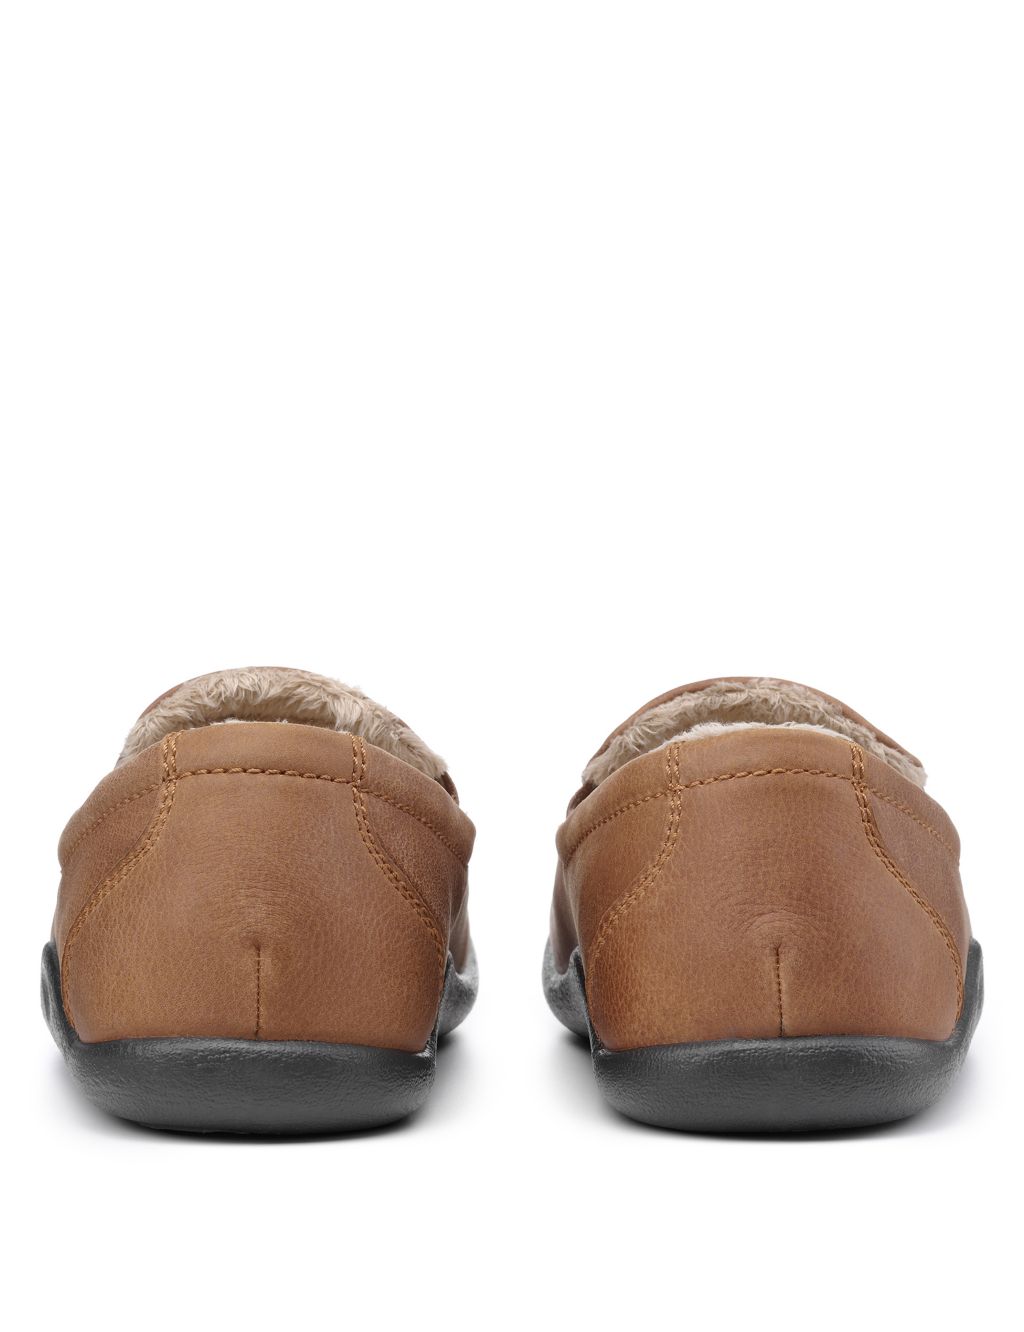 Leather Slippers image 3